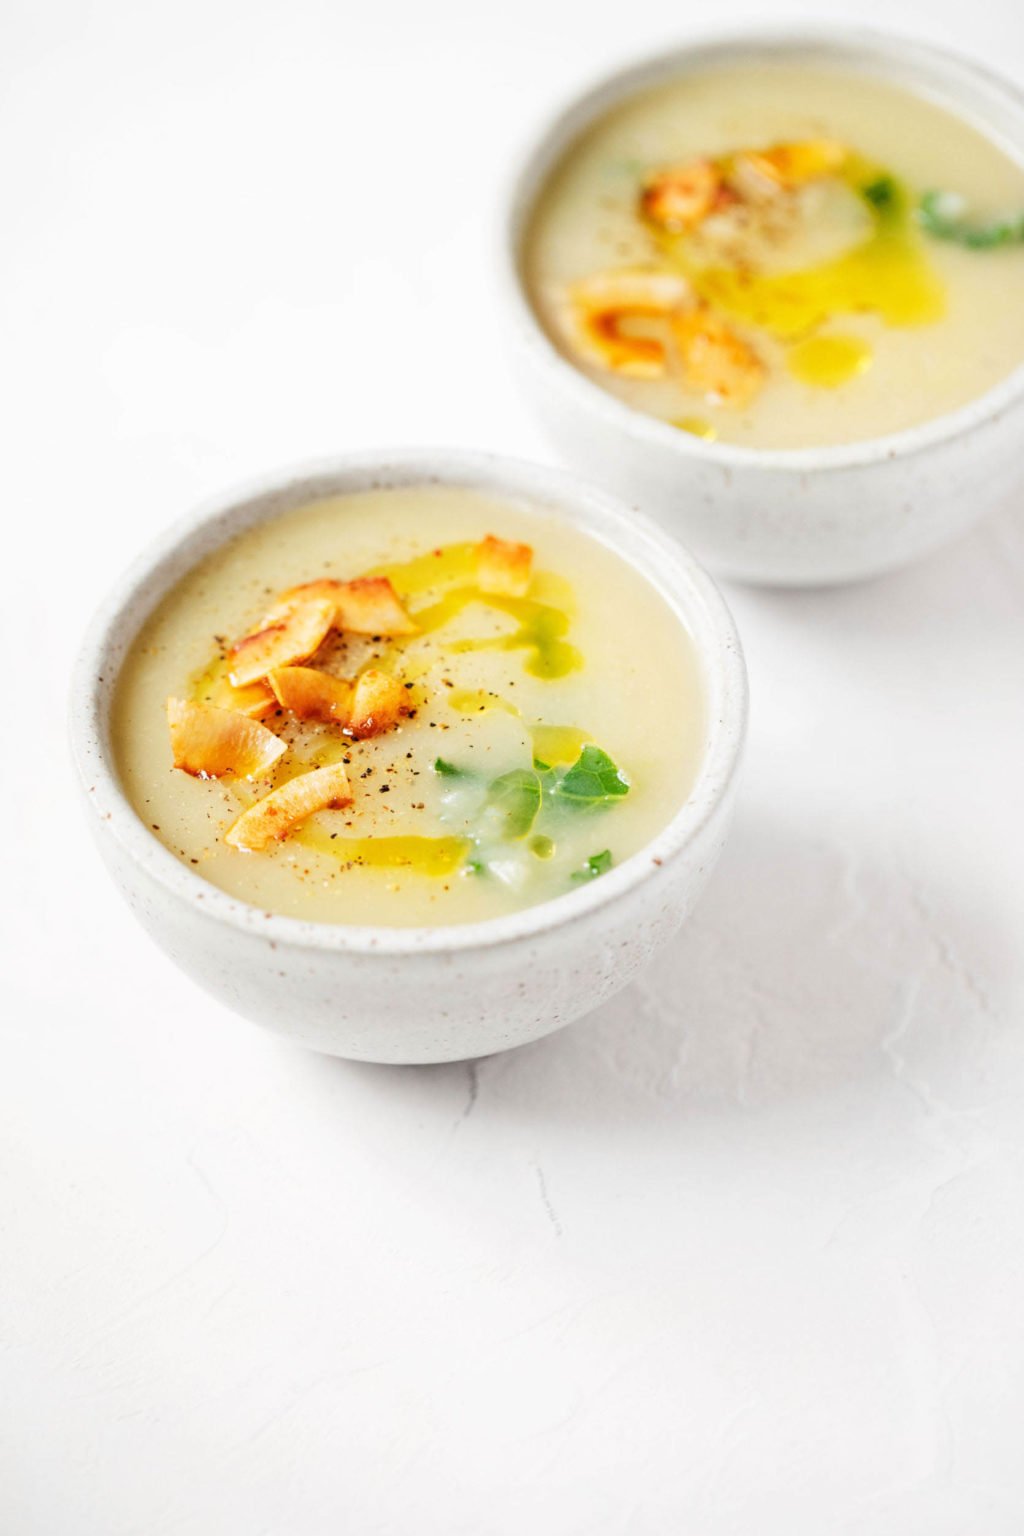 Two portions of a vegan potato leek soup are resting in small, round white soup bowls. They're laid out on a bright, white surface.